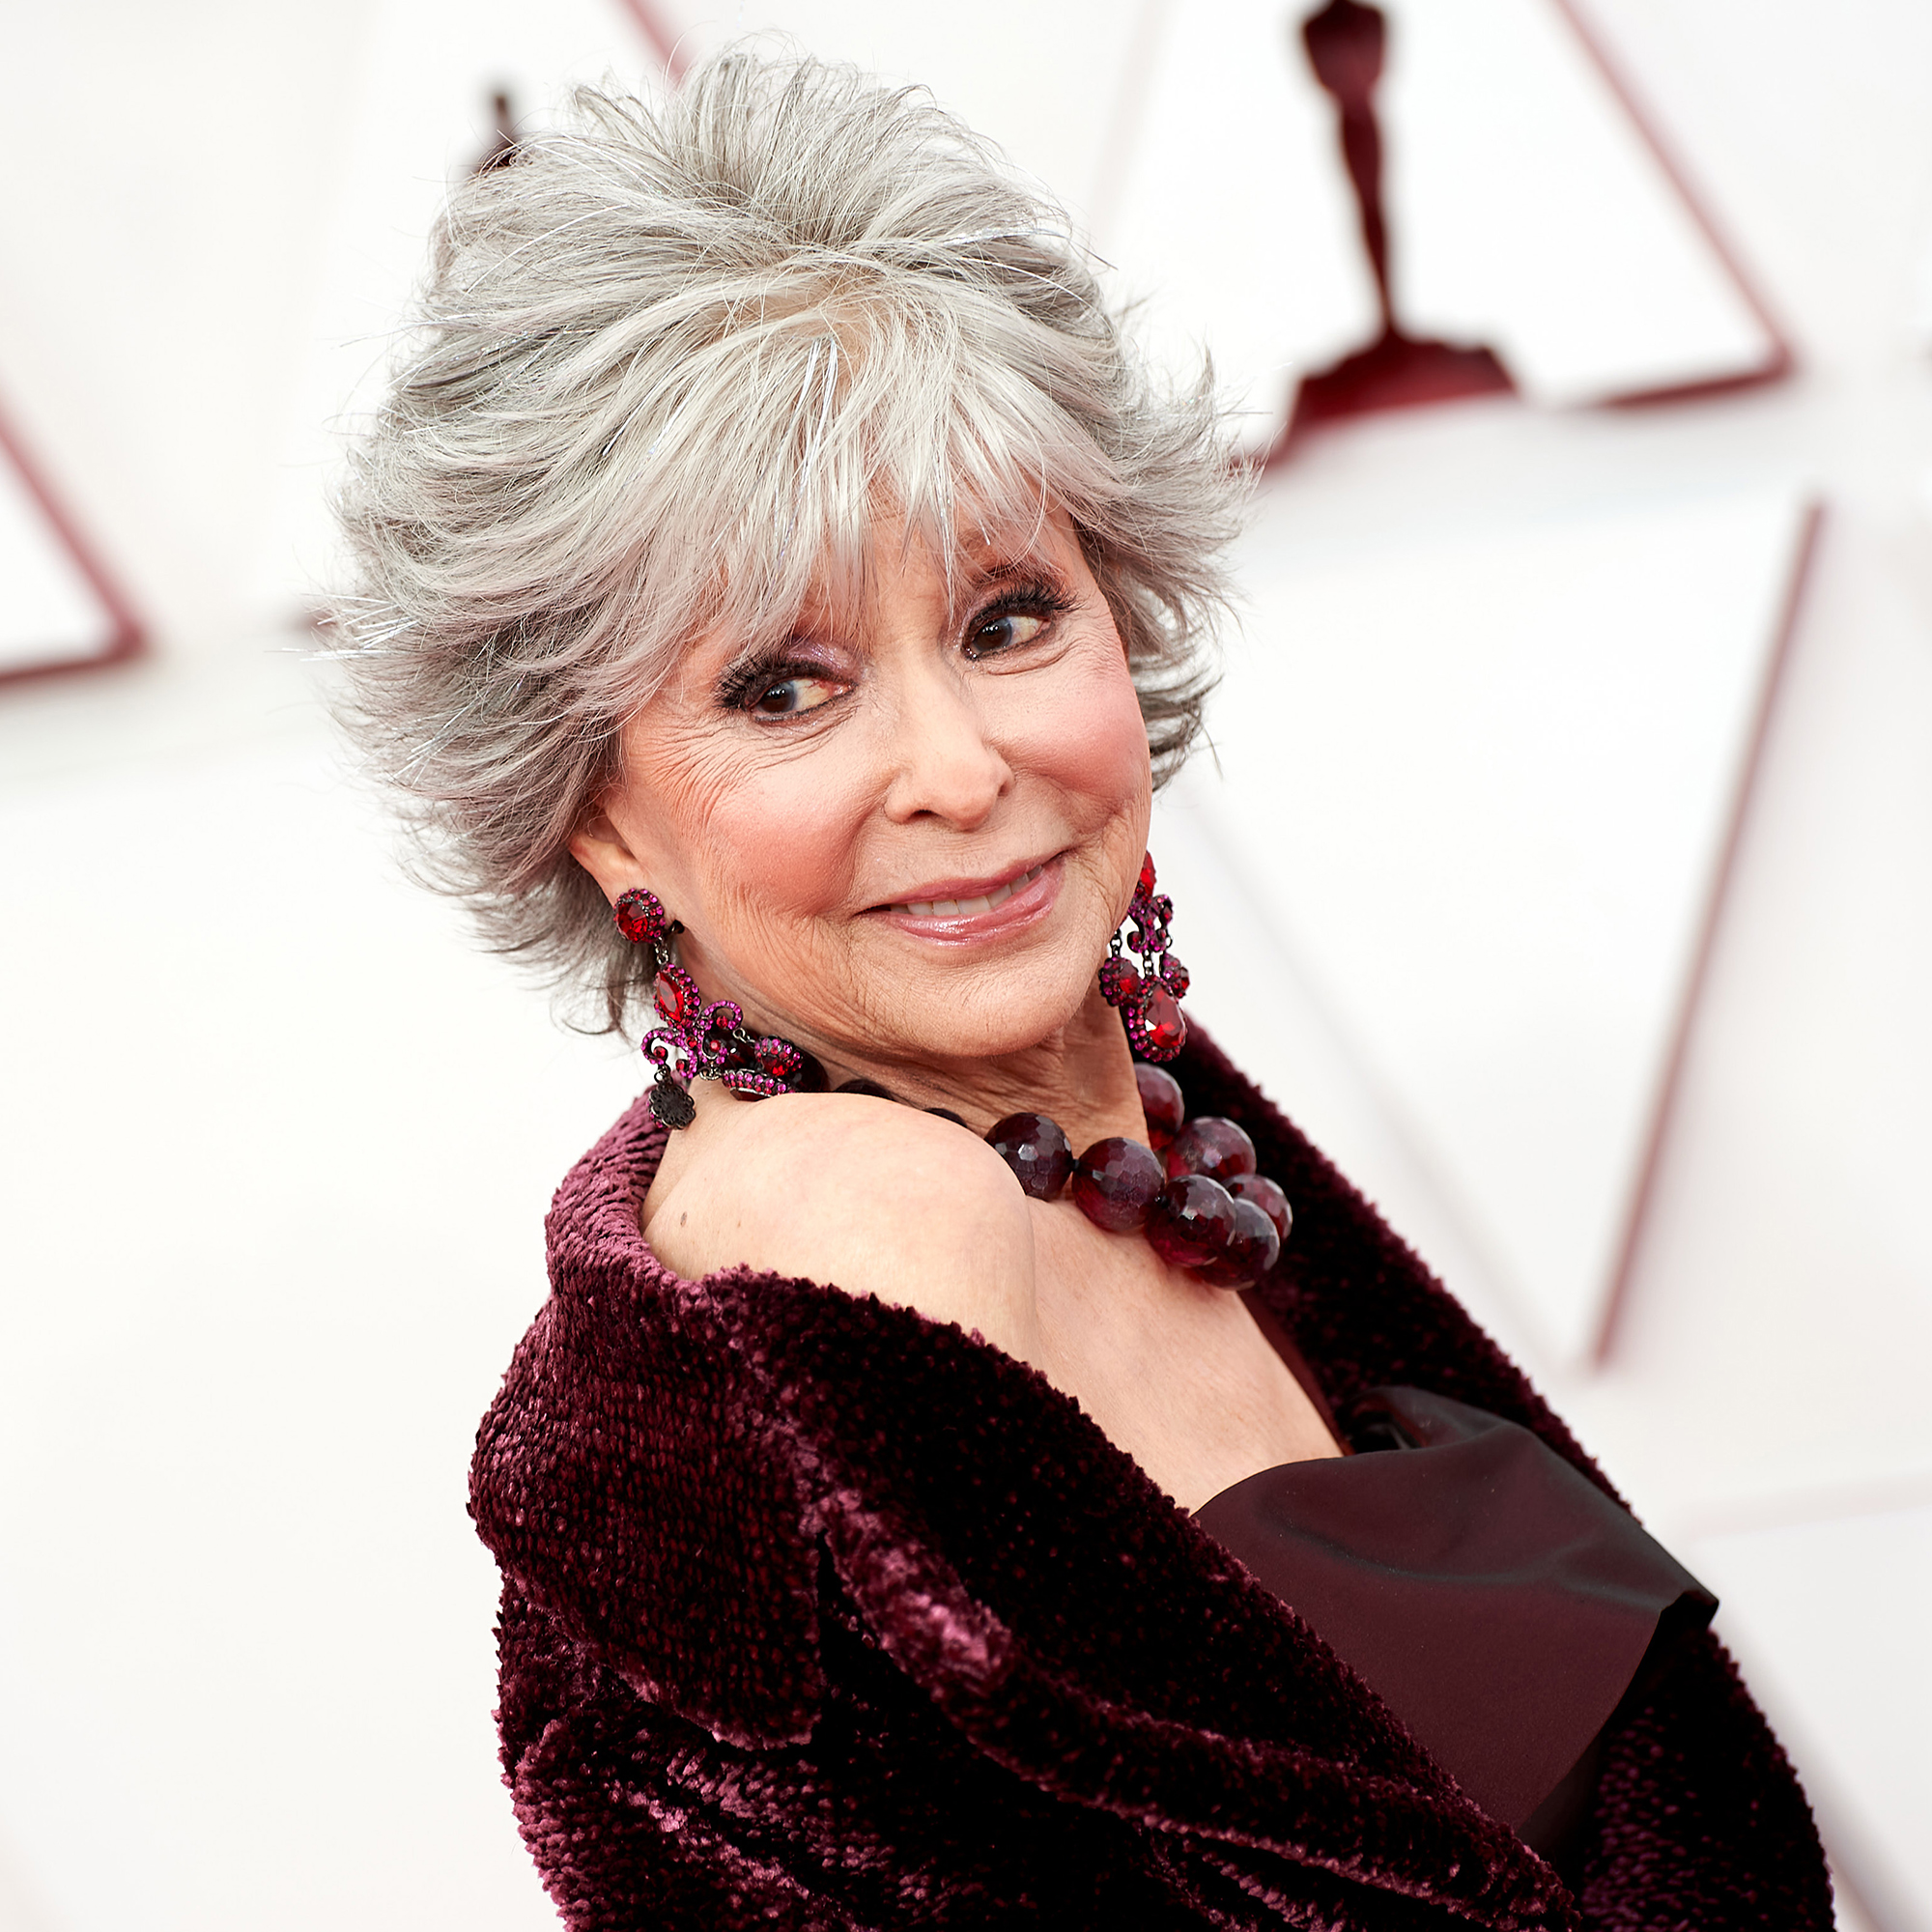 Rita Moreno fiercely responds to criticism of her appearance